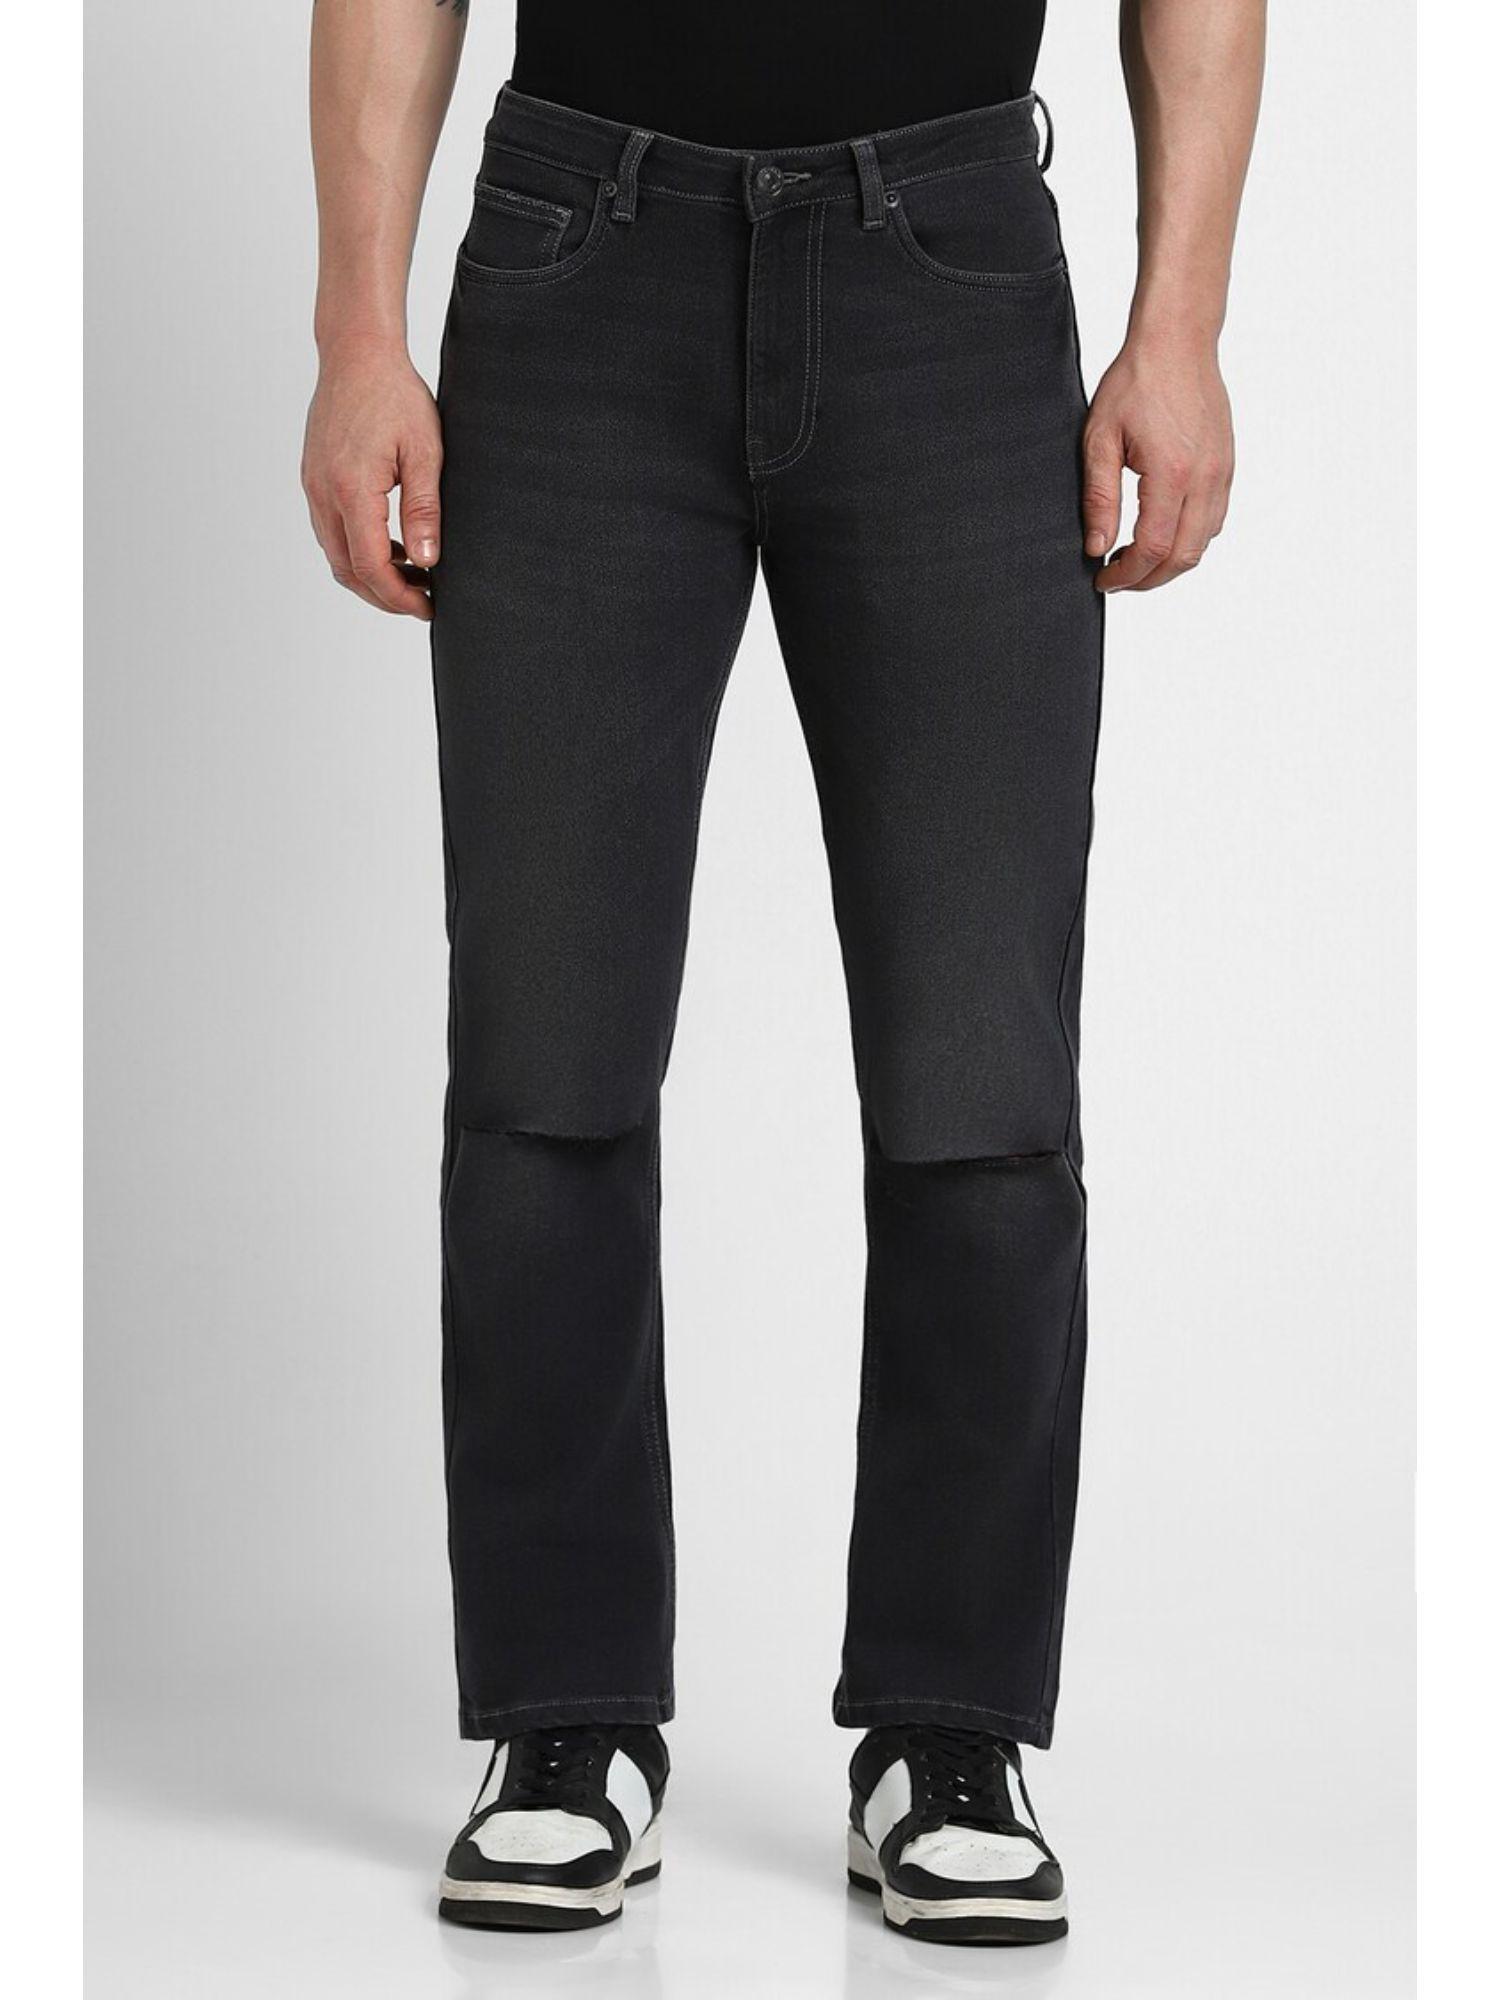 solid black straight fit jeans